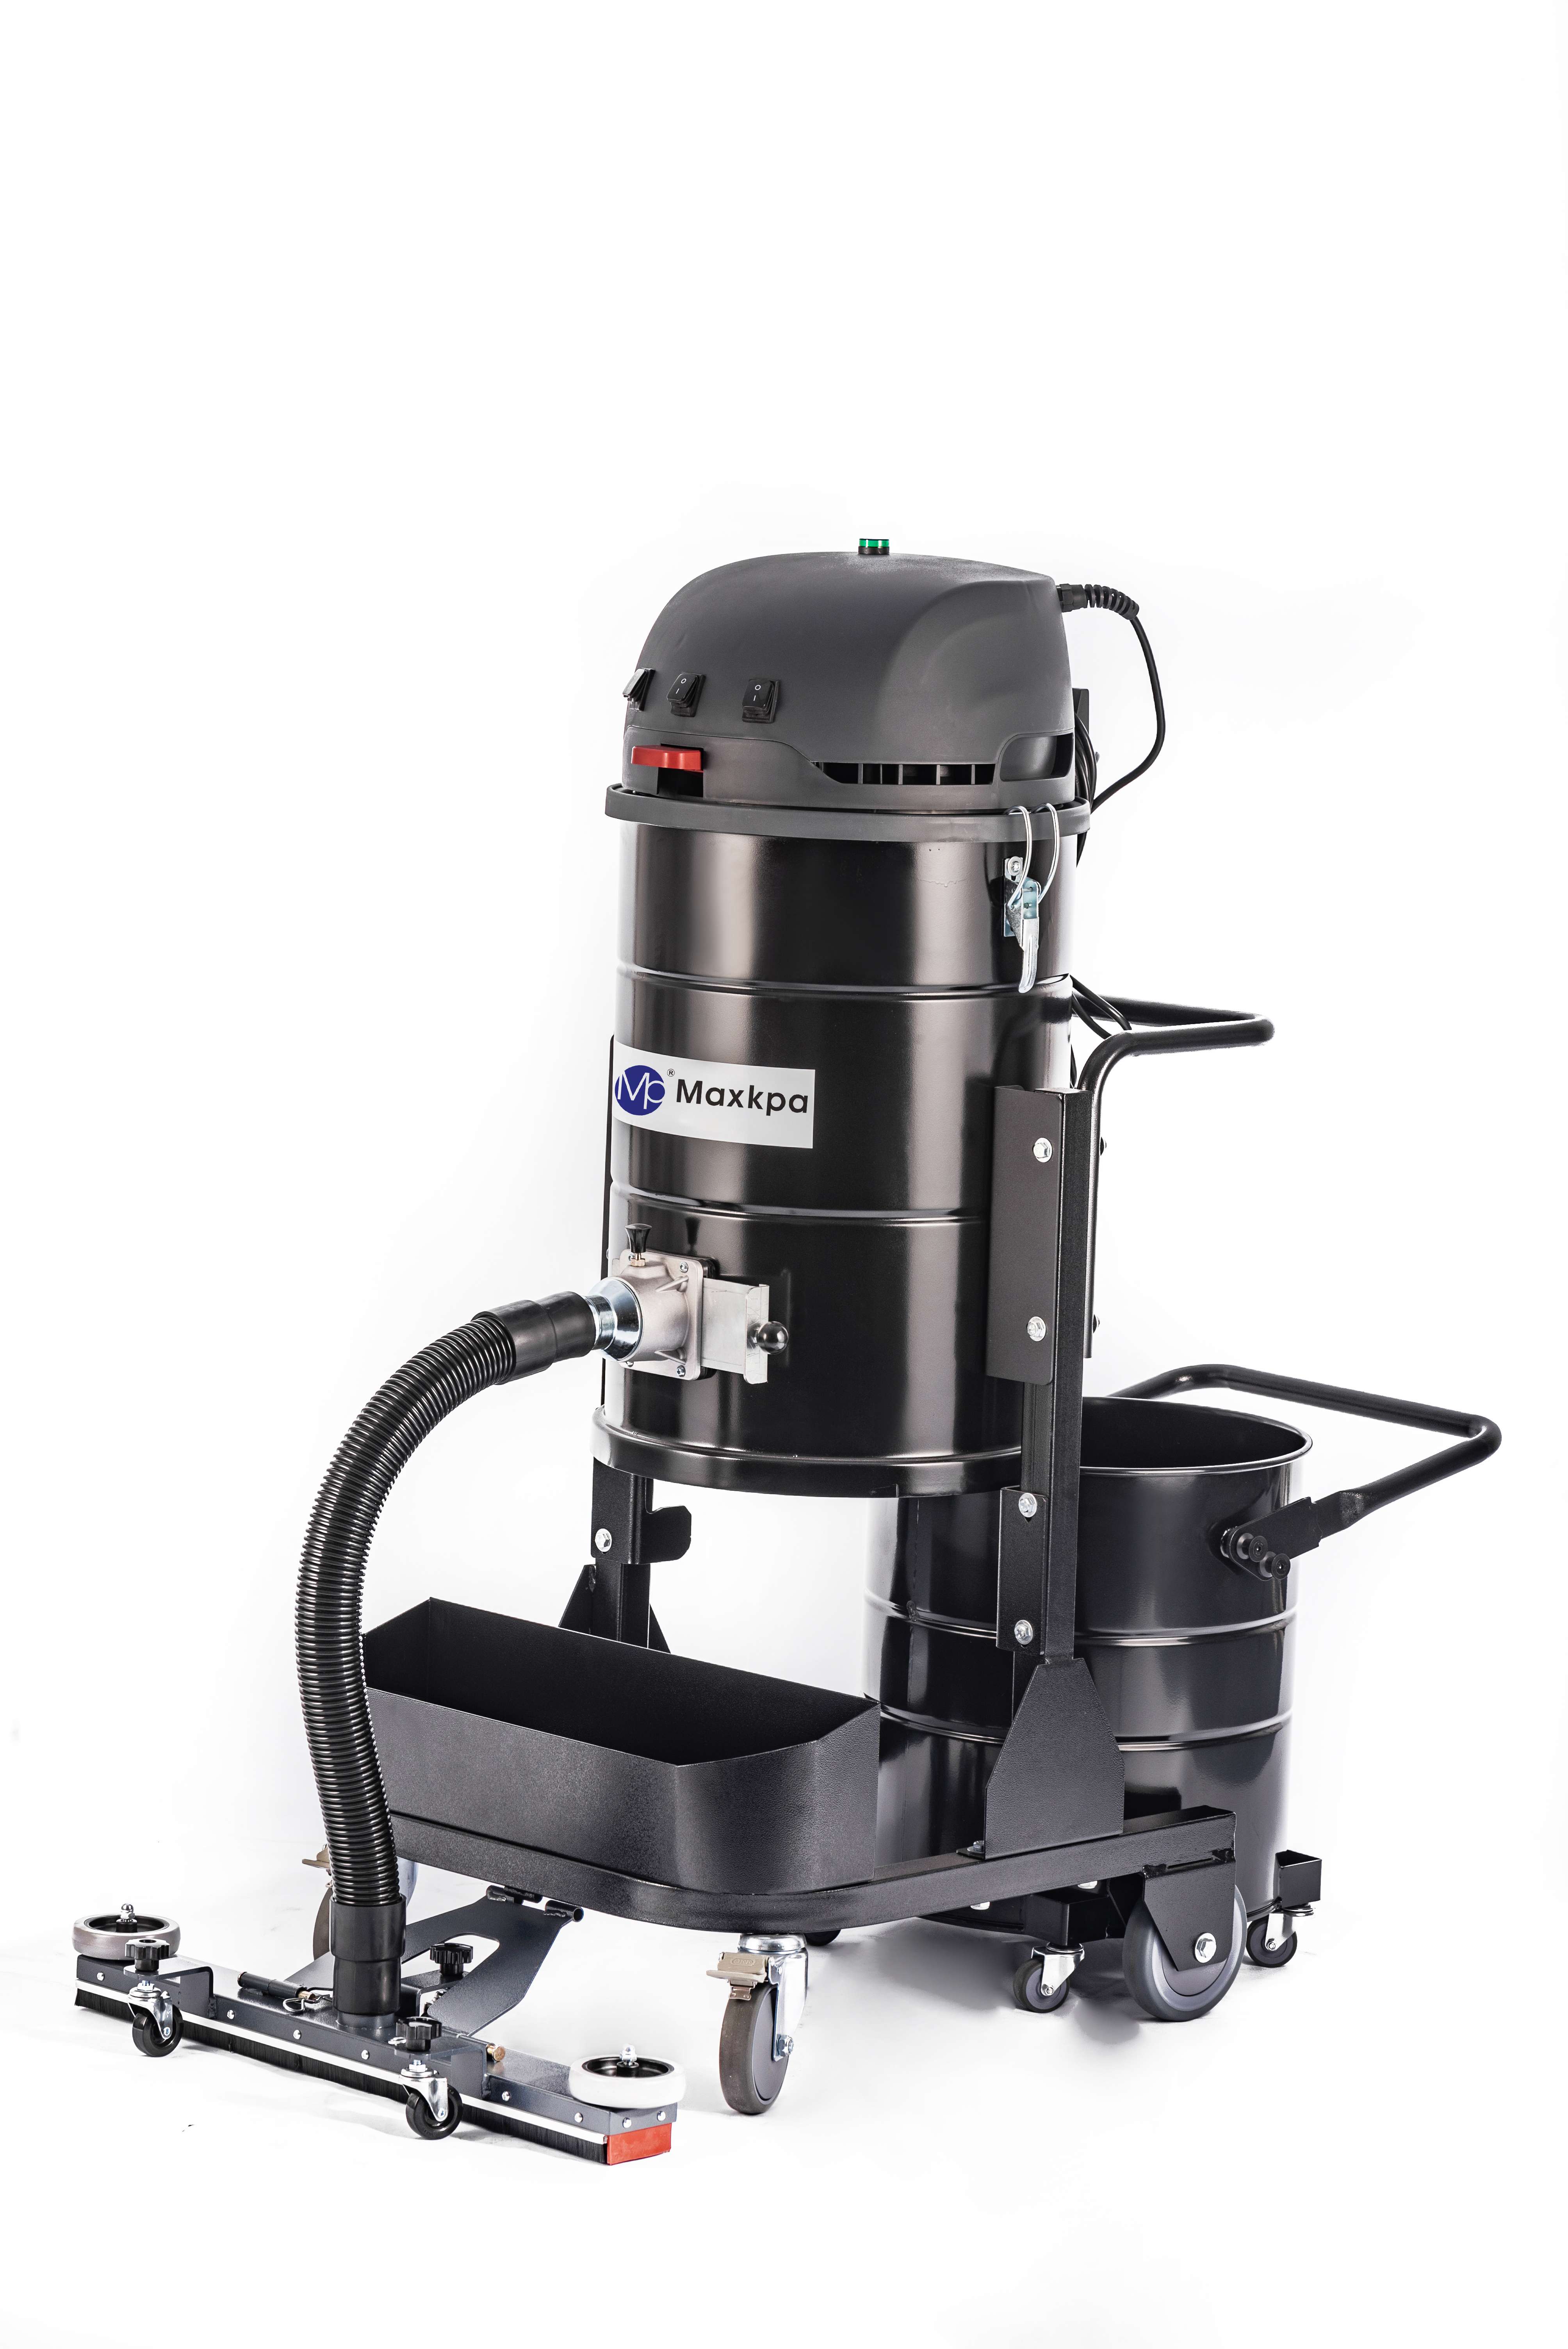 Industrial Vacuum Cleaner: A Must-Have for All Manufacturing Industries